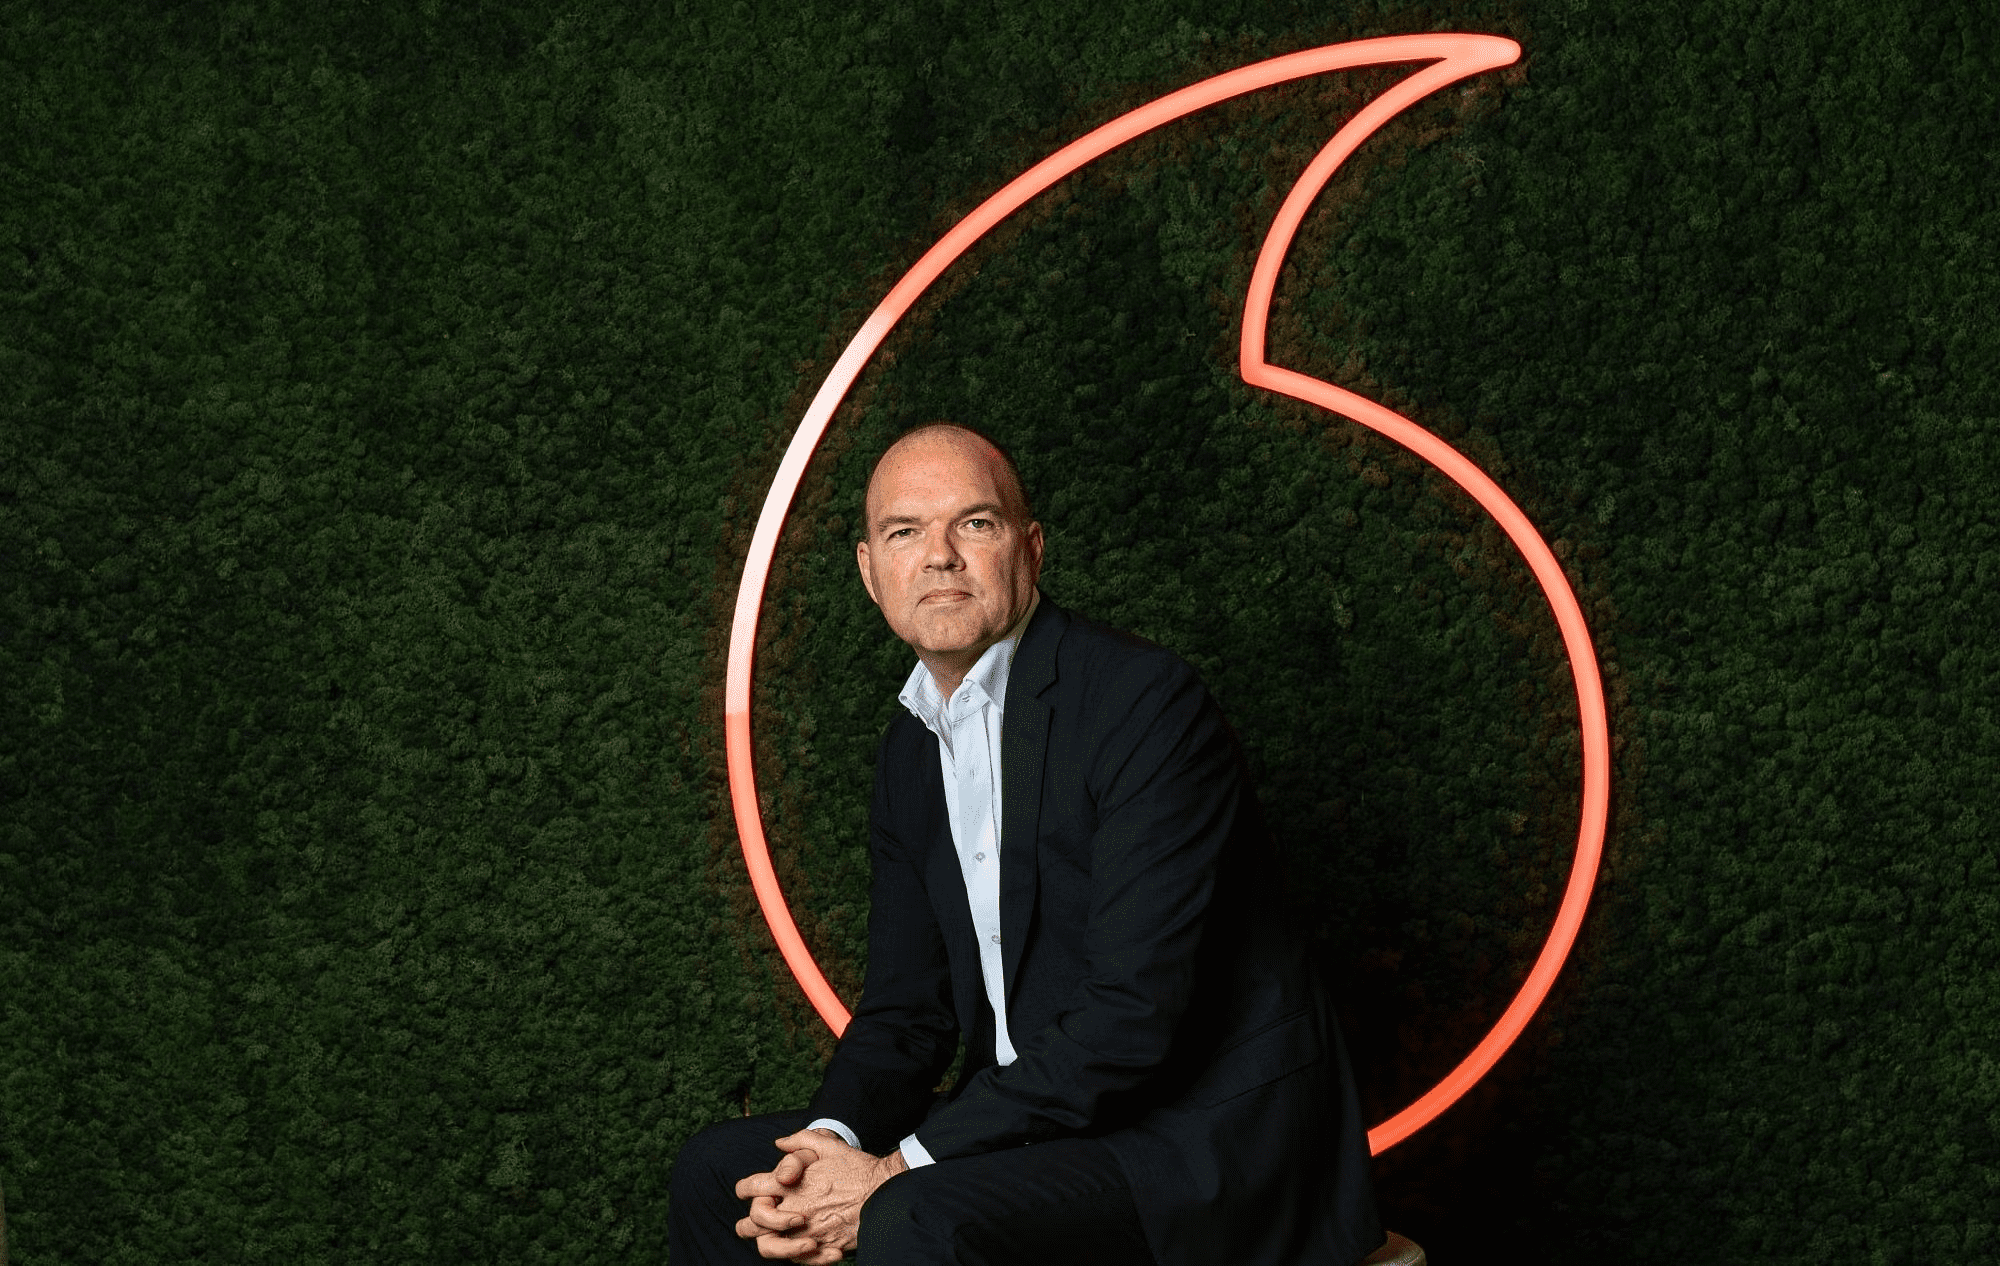 Nick Read, CEO of Vodafone, set to leave the telecoms giant after four years